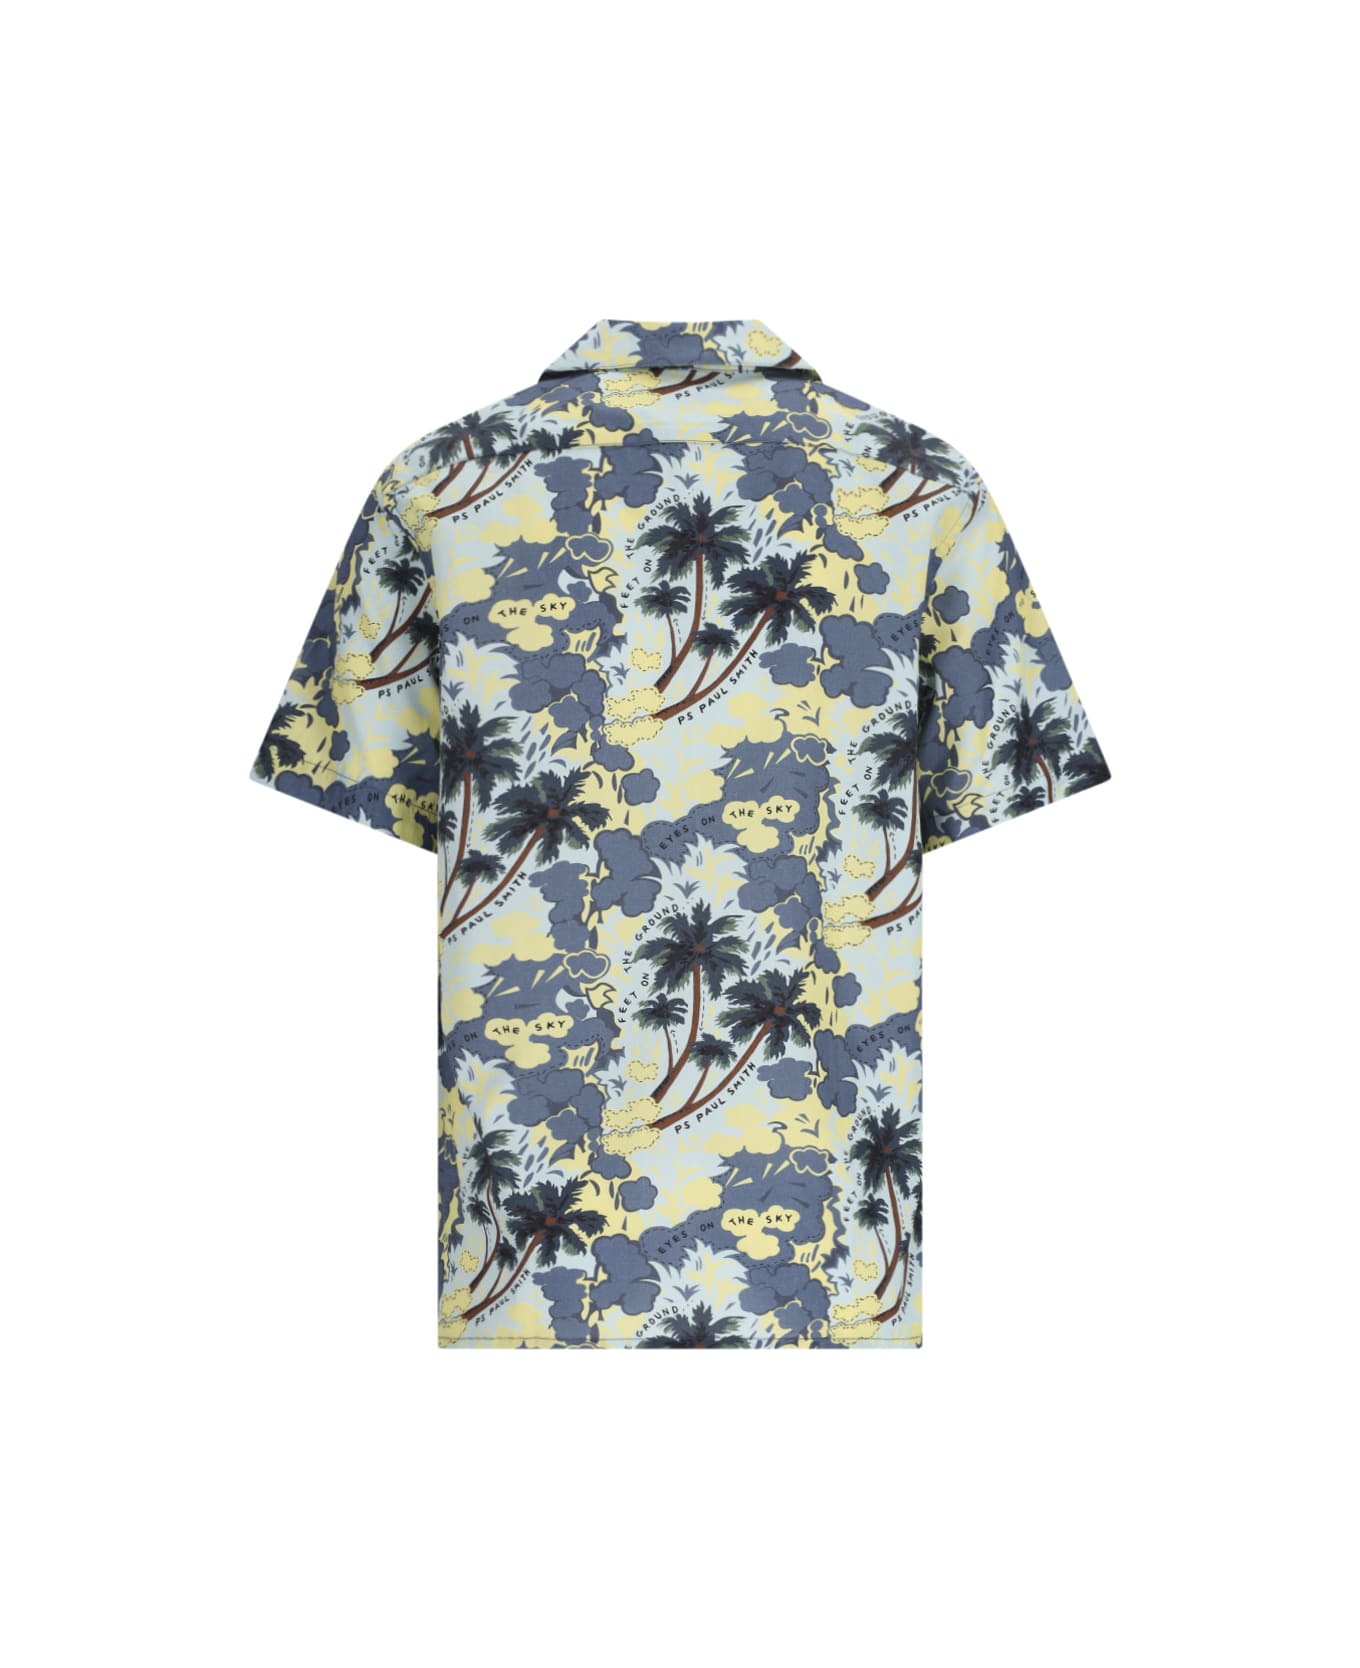 Paul Smith 'eyes In The Sky' Shirt - Multicolor シャツ